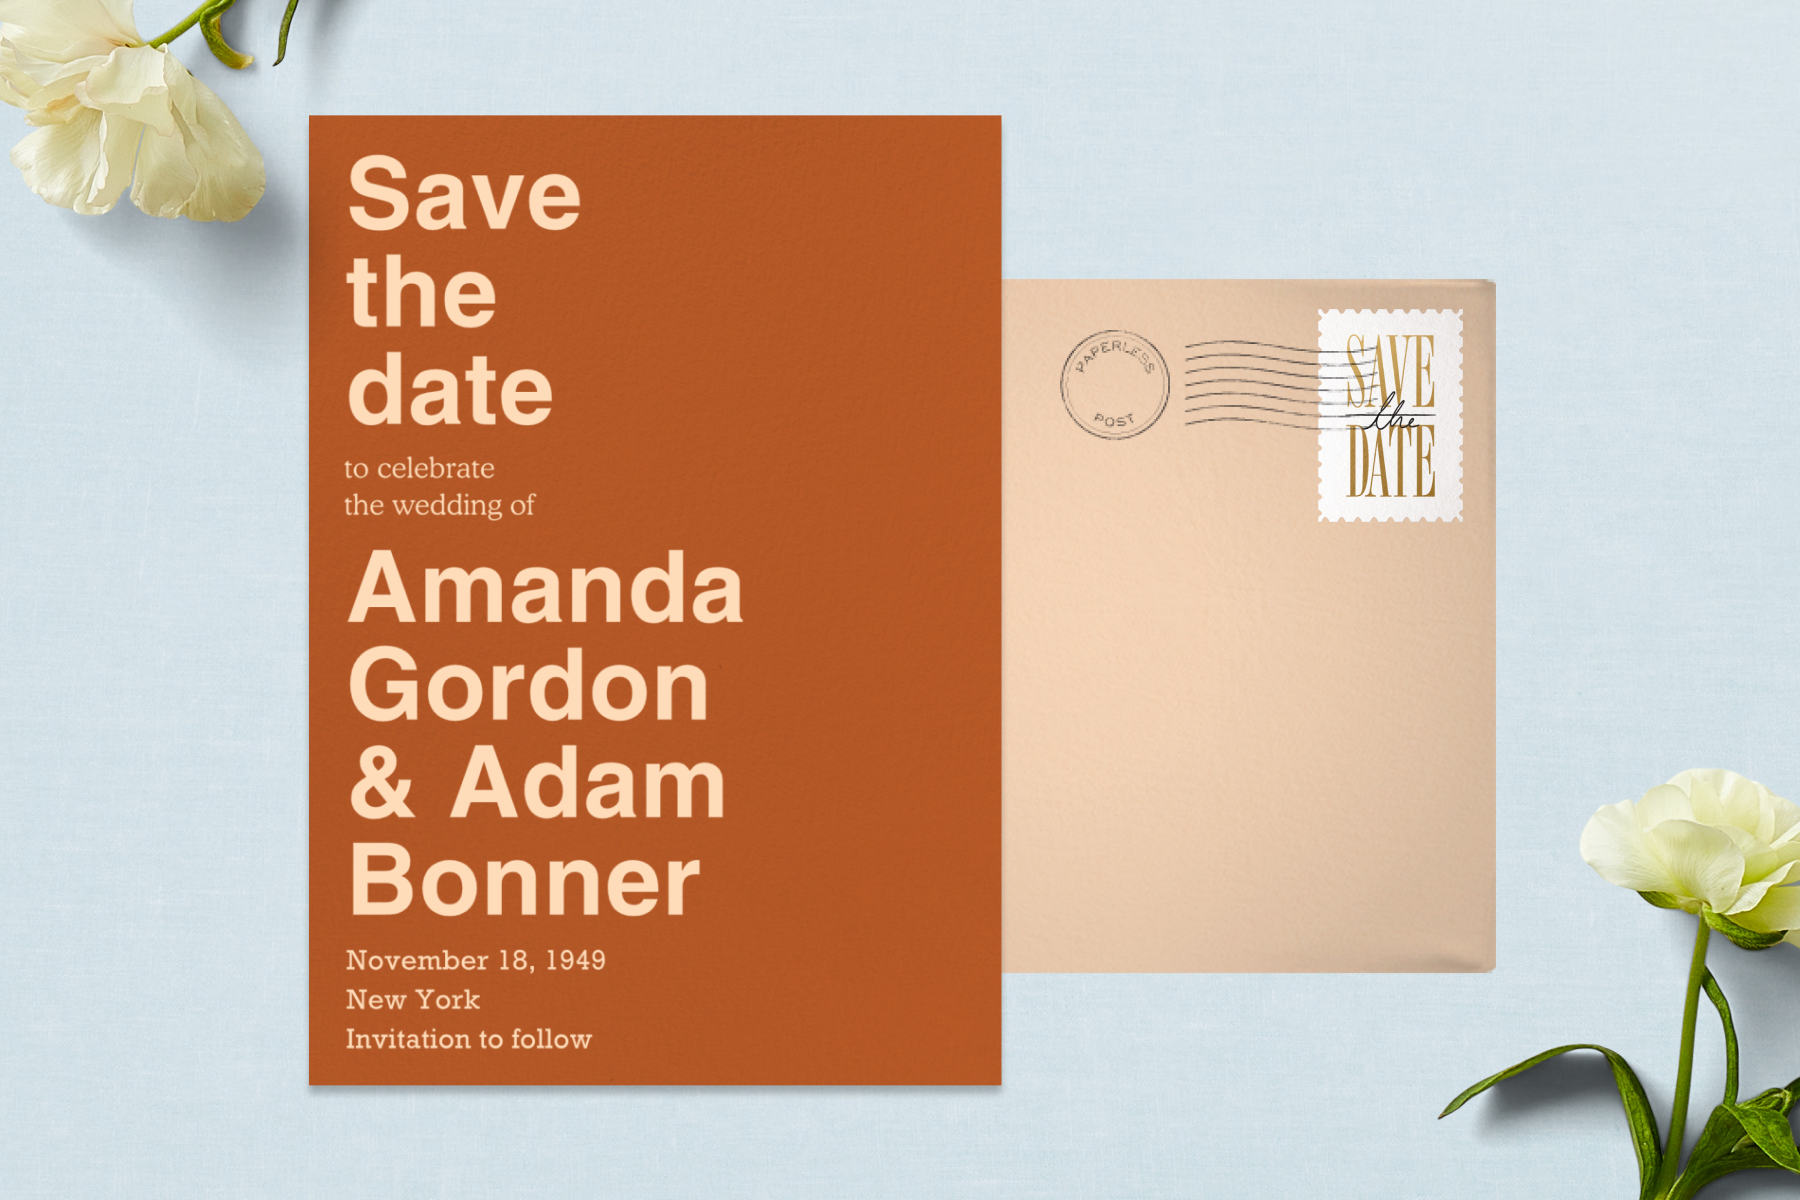 A typographical orange wedding invitation paired with a peach envelope and surrounded by white flowers.